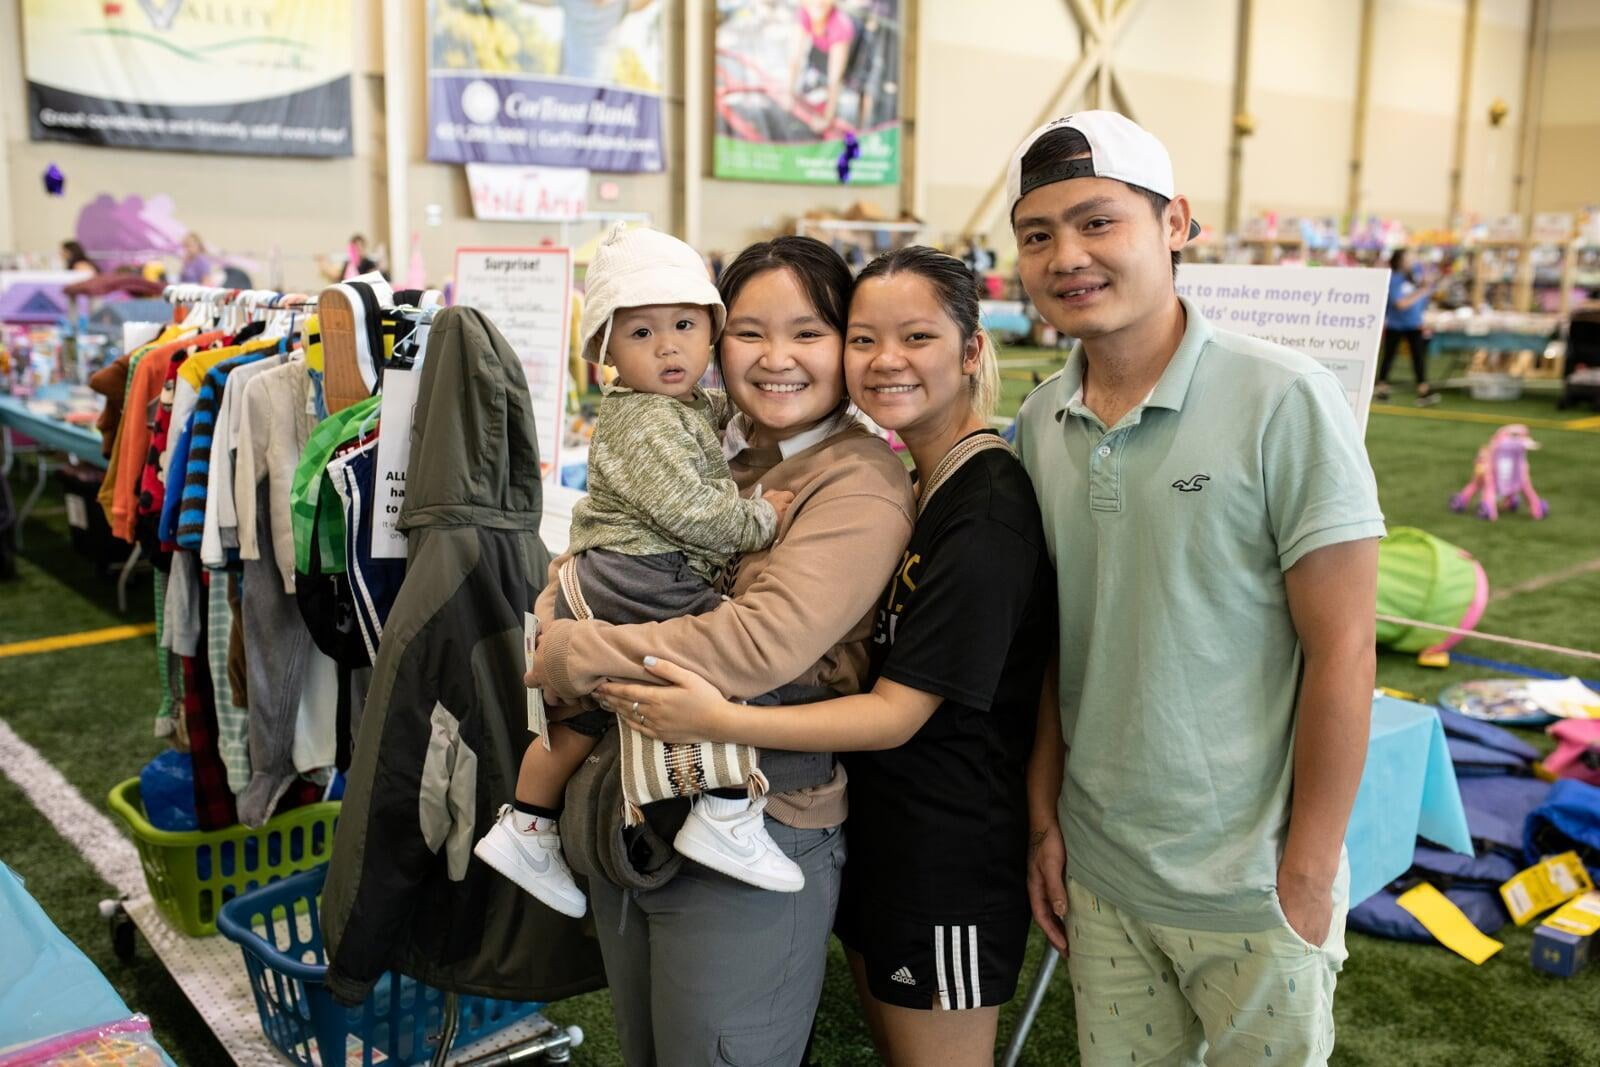 Grandmom, mom and baby in a carrier gather together and flash a smile as they shop for baby items.